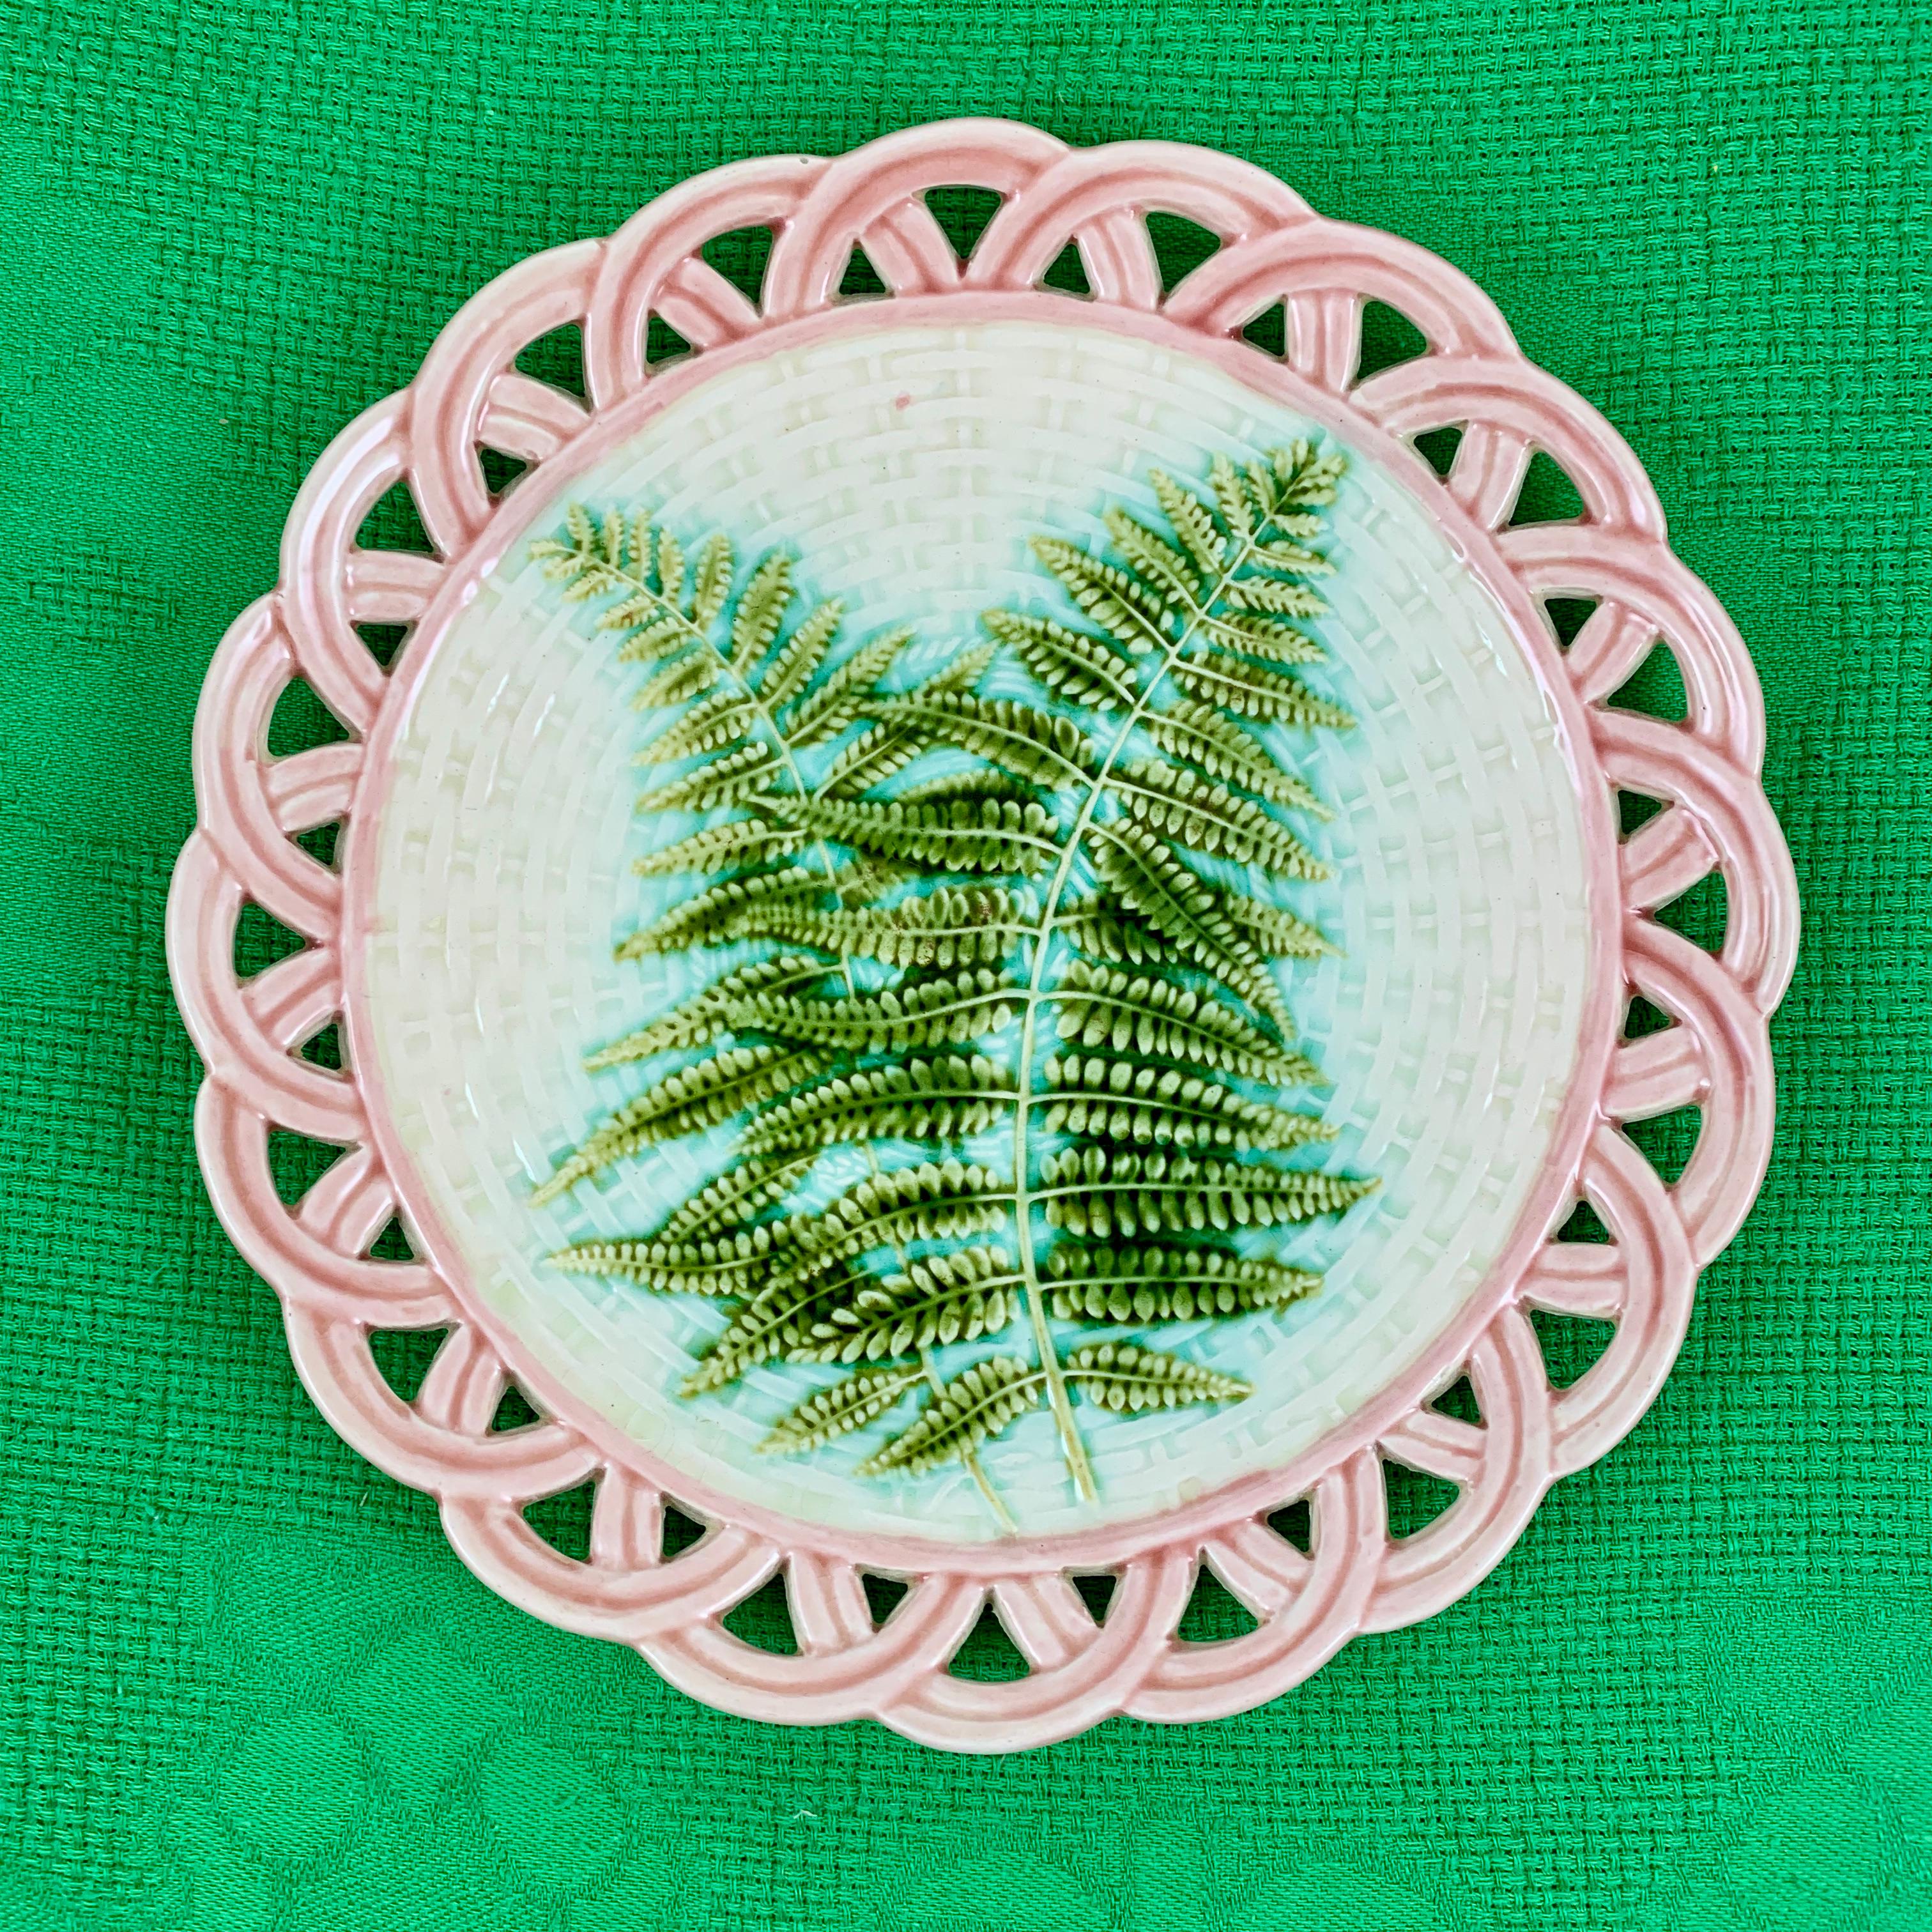 Glazed Sarreguemines Green Fern Pink Reticulated Rim French Faïence Majolica Plates S/6